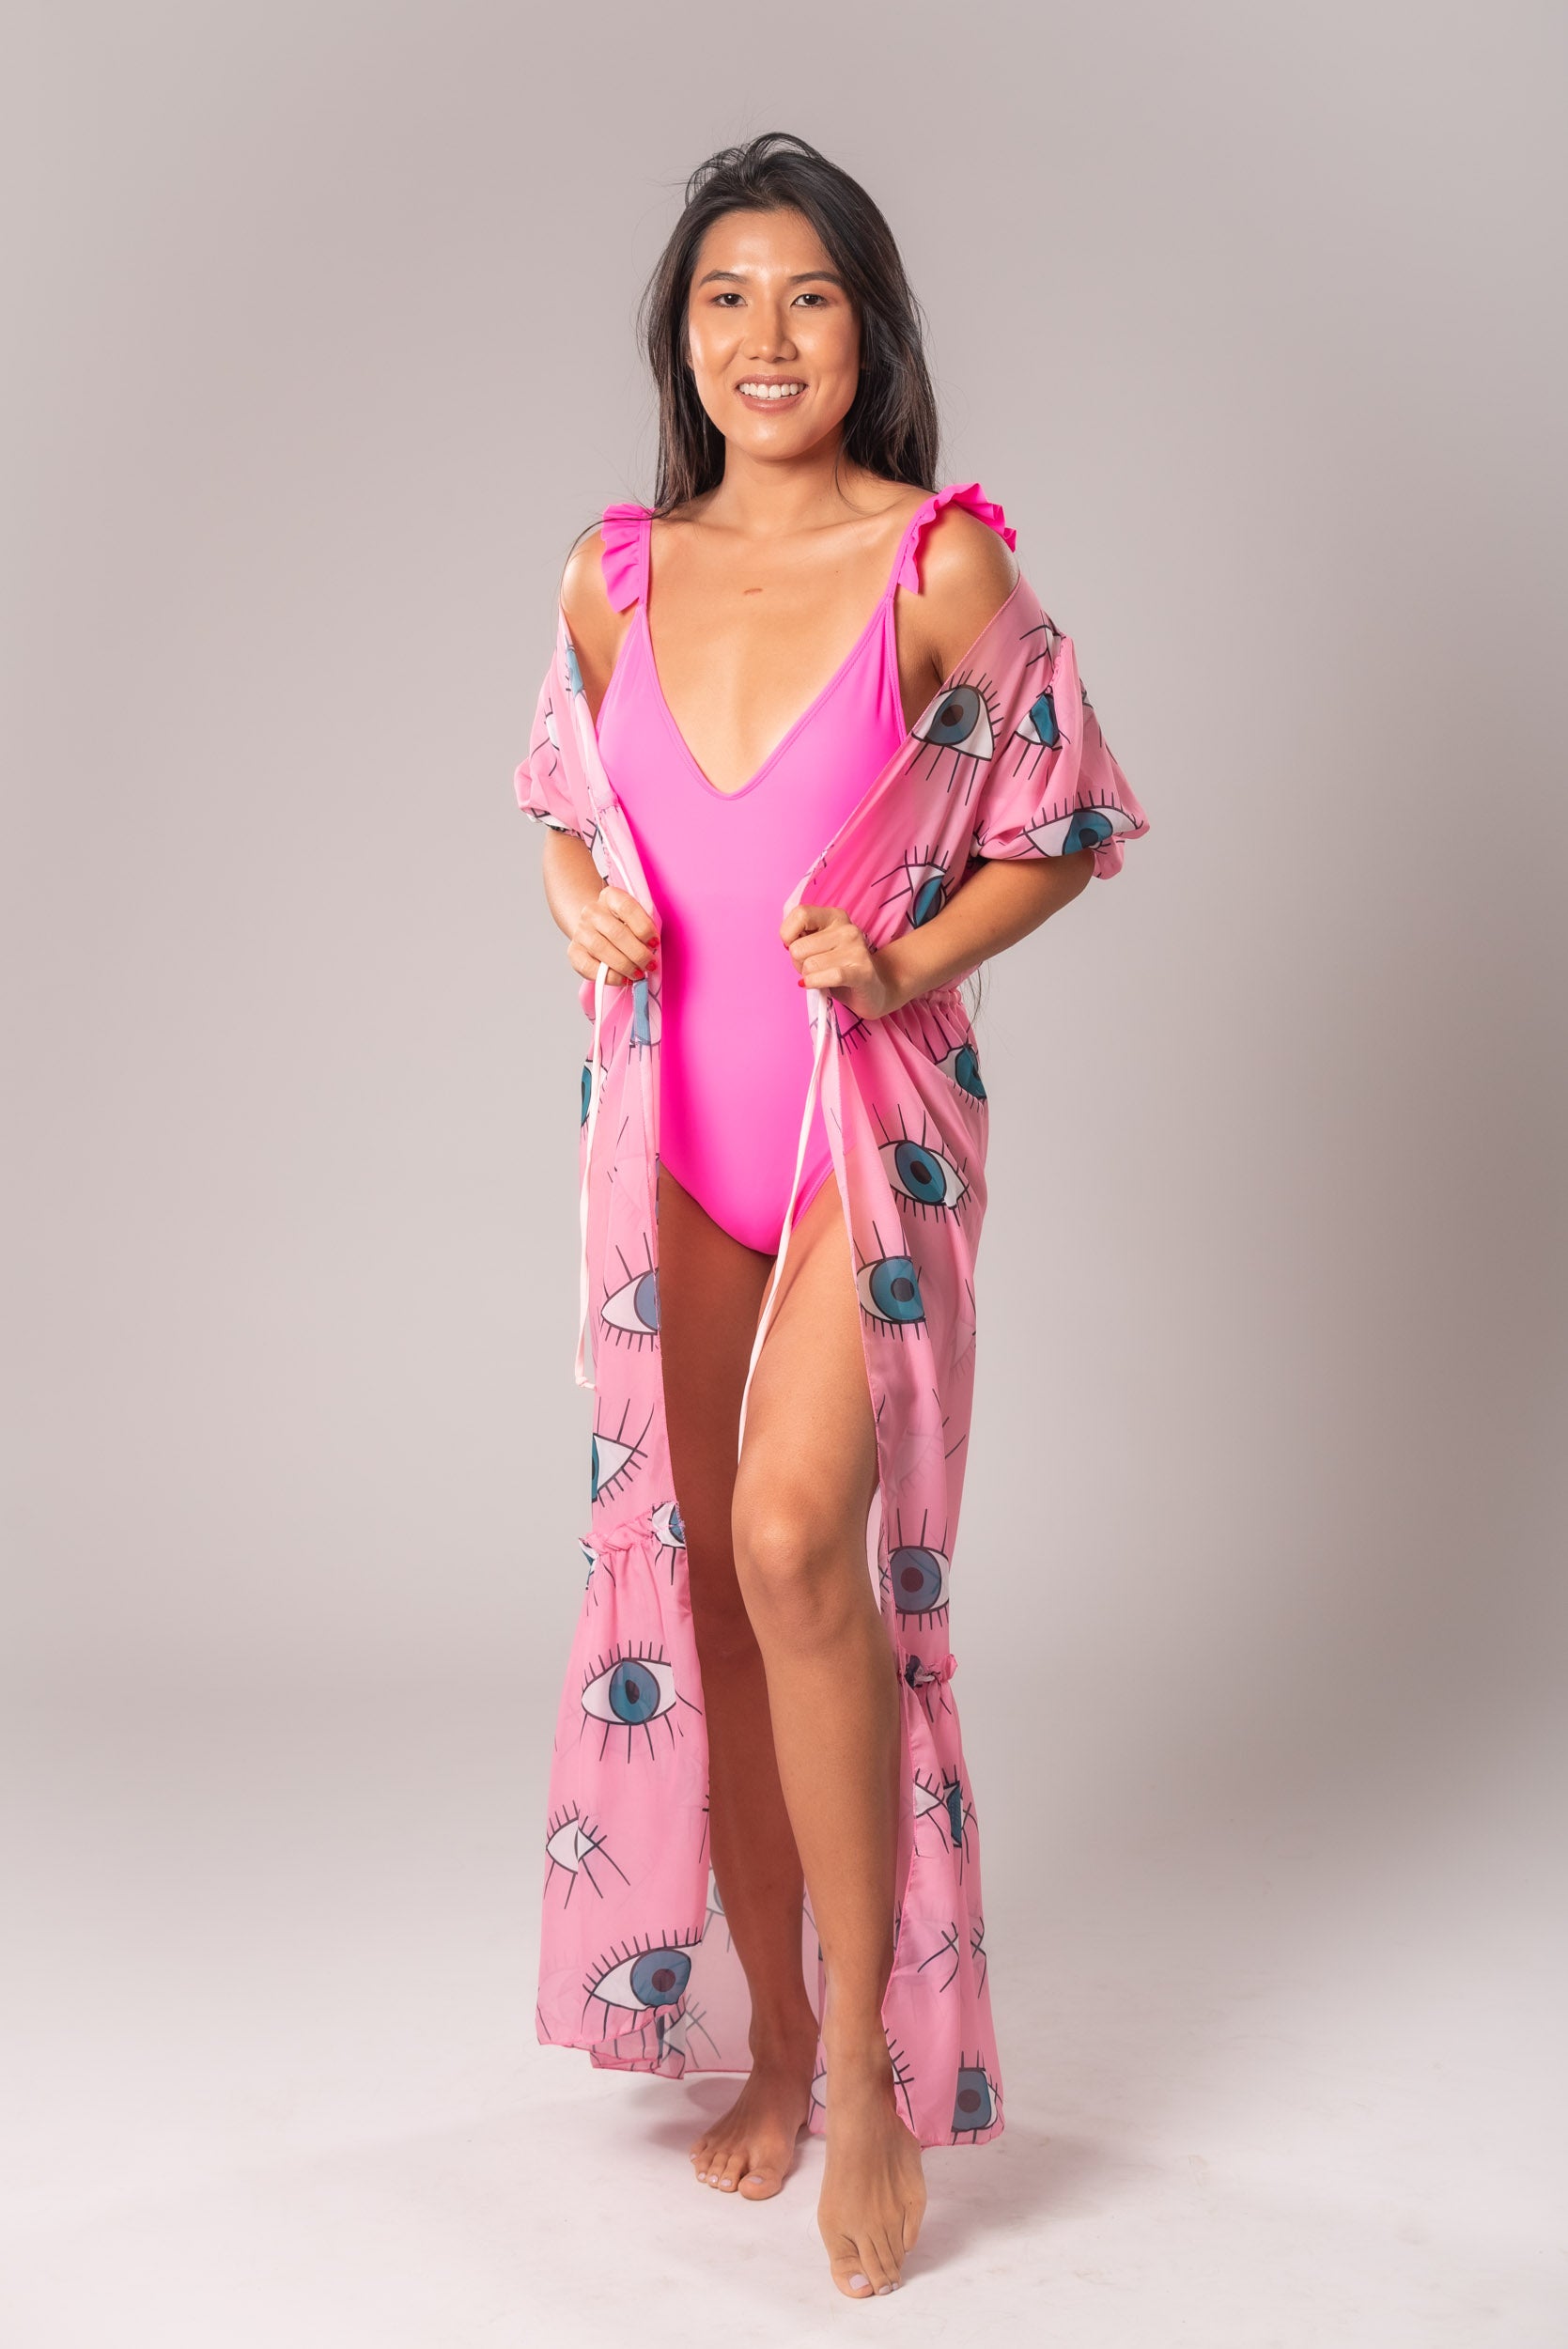 Cute Pink One Piece Kabdul Swimsuit and Body , With a Pink Eye Cover Ups